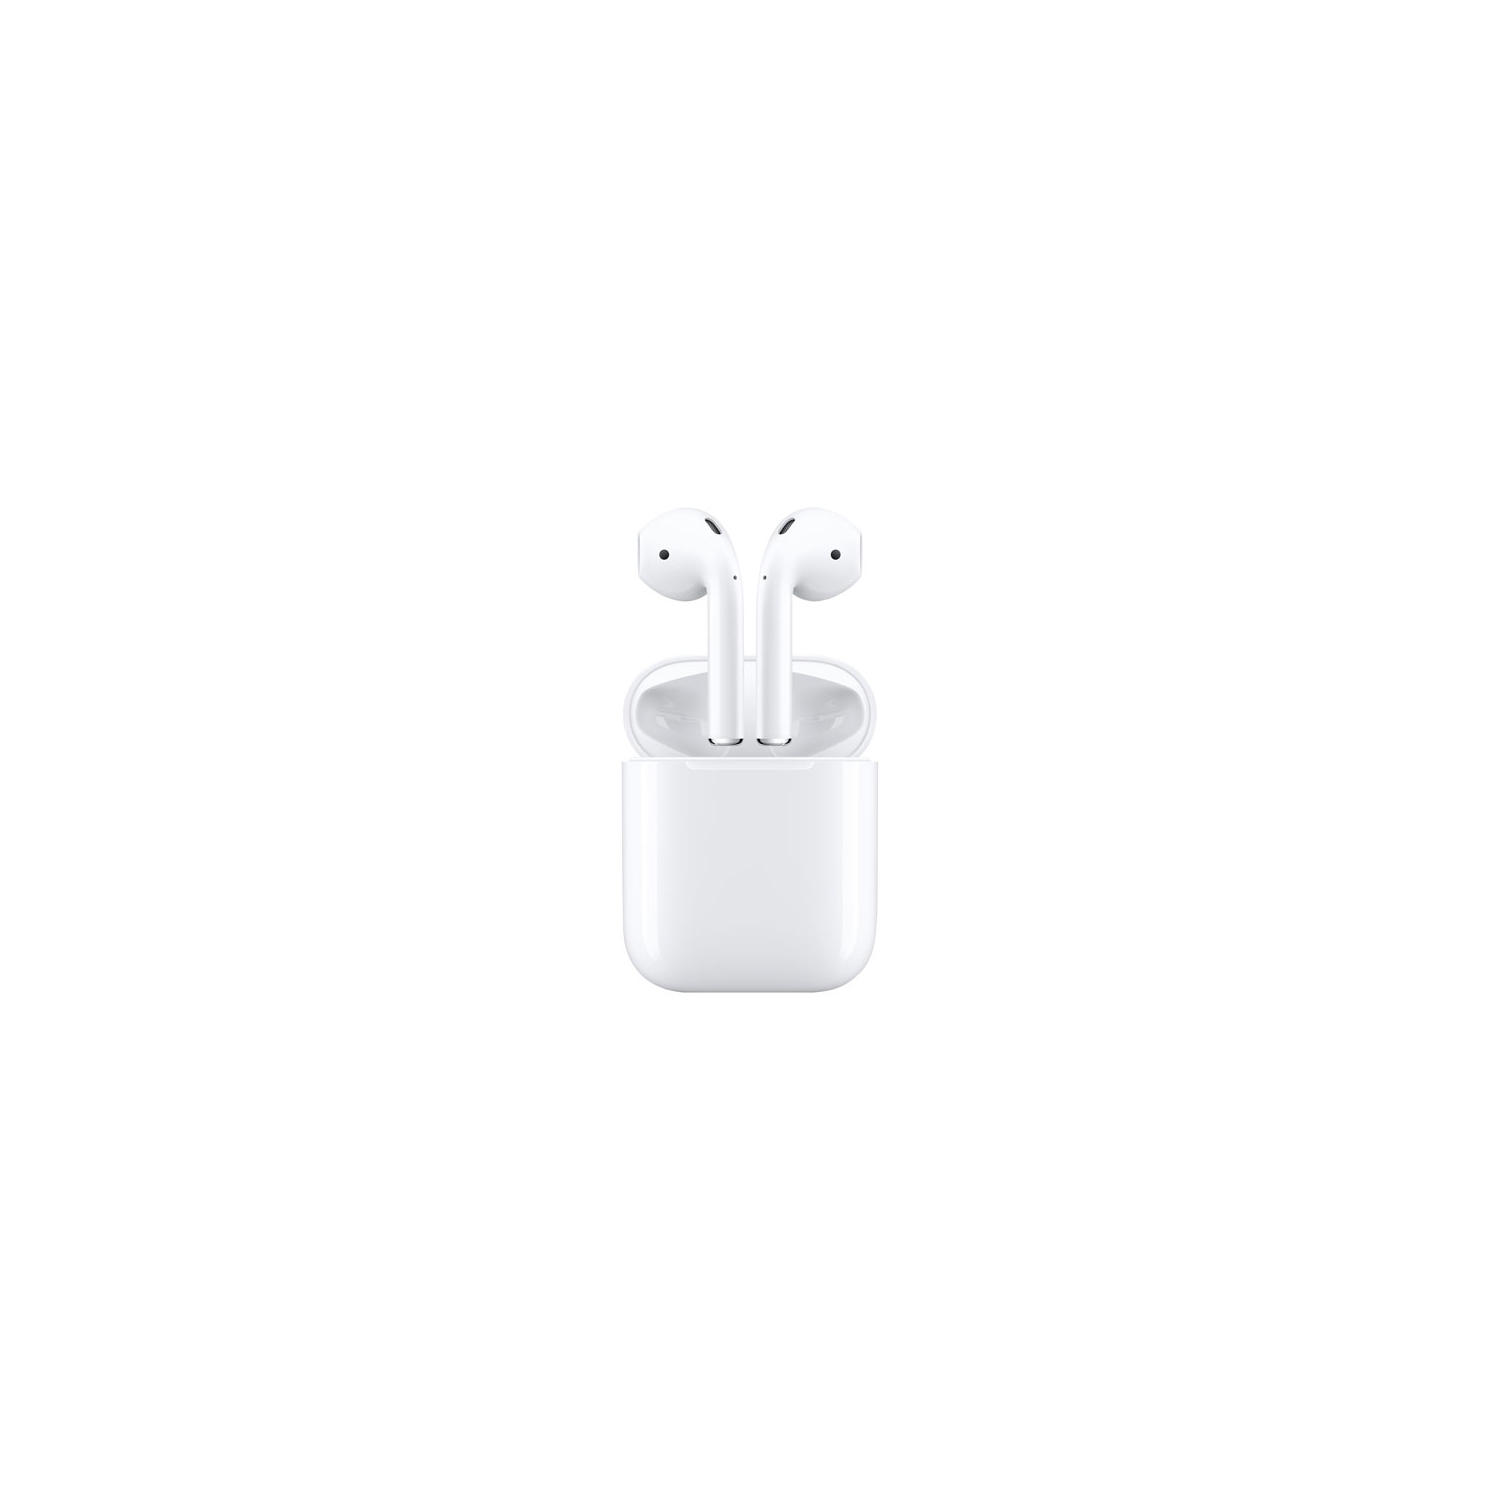 Refurbished (Good) - Apple AirPods In-Ear Truly Wireless Headphones (2019) - White